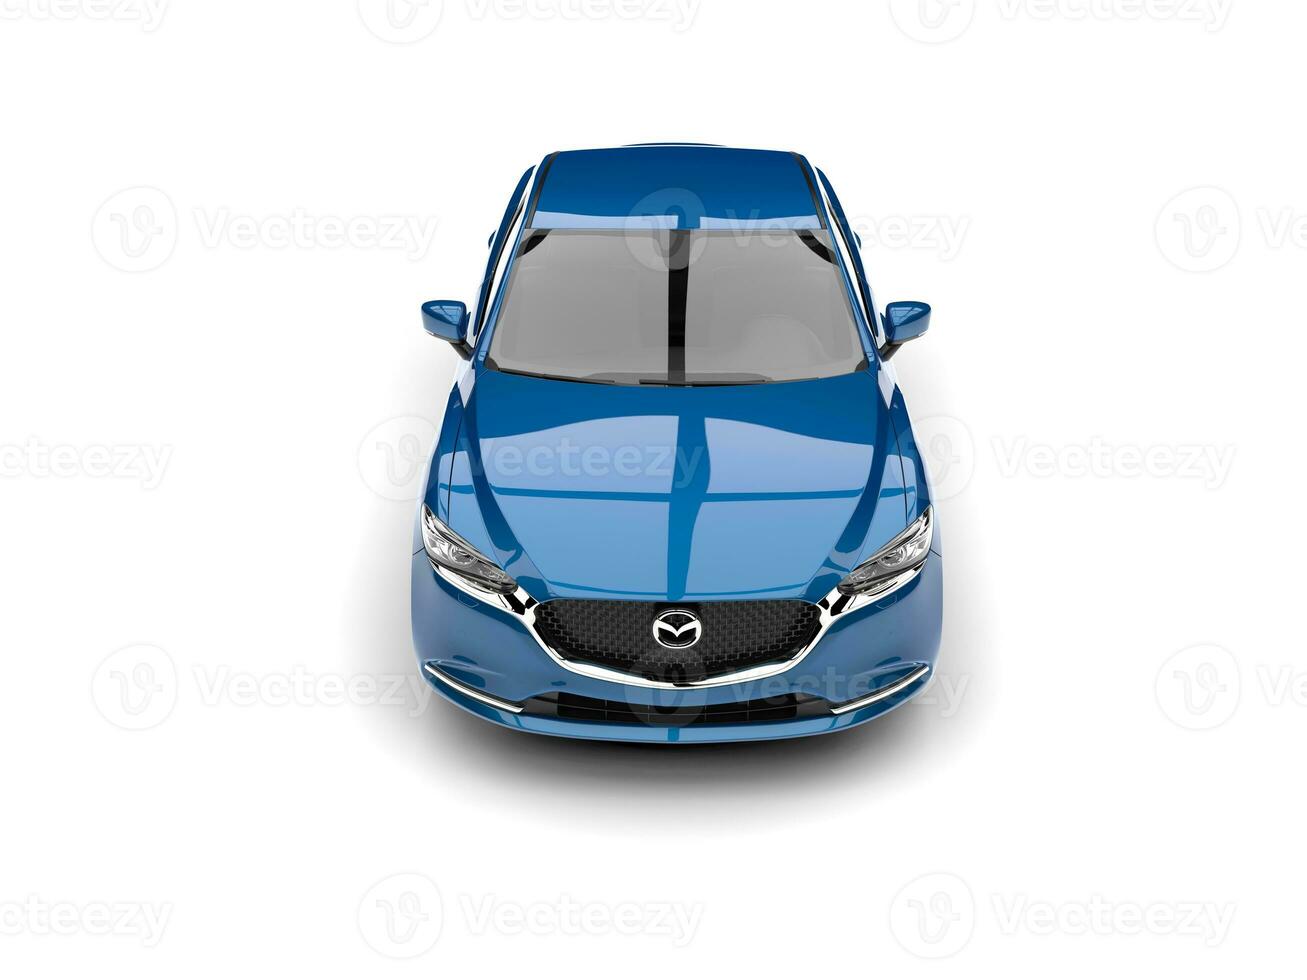 Blue Mazda 6 2018 - 2021 model - front top down view - 3D Illustration - isolated on white background photo